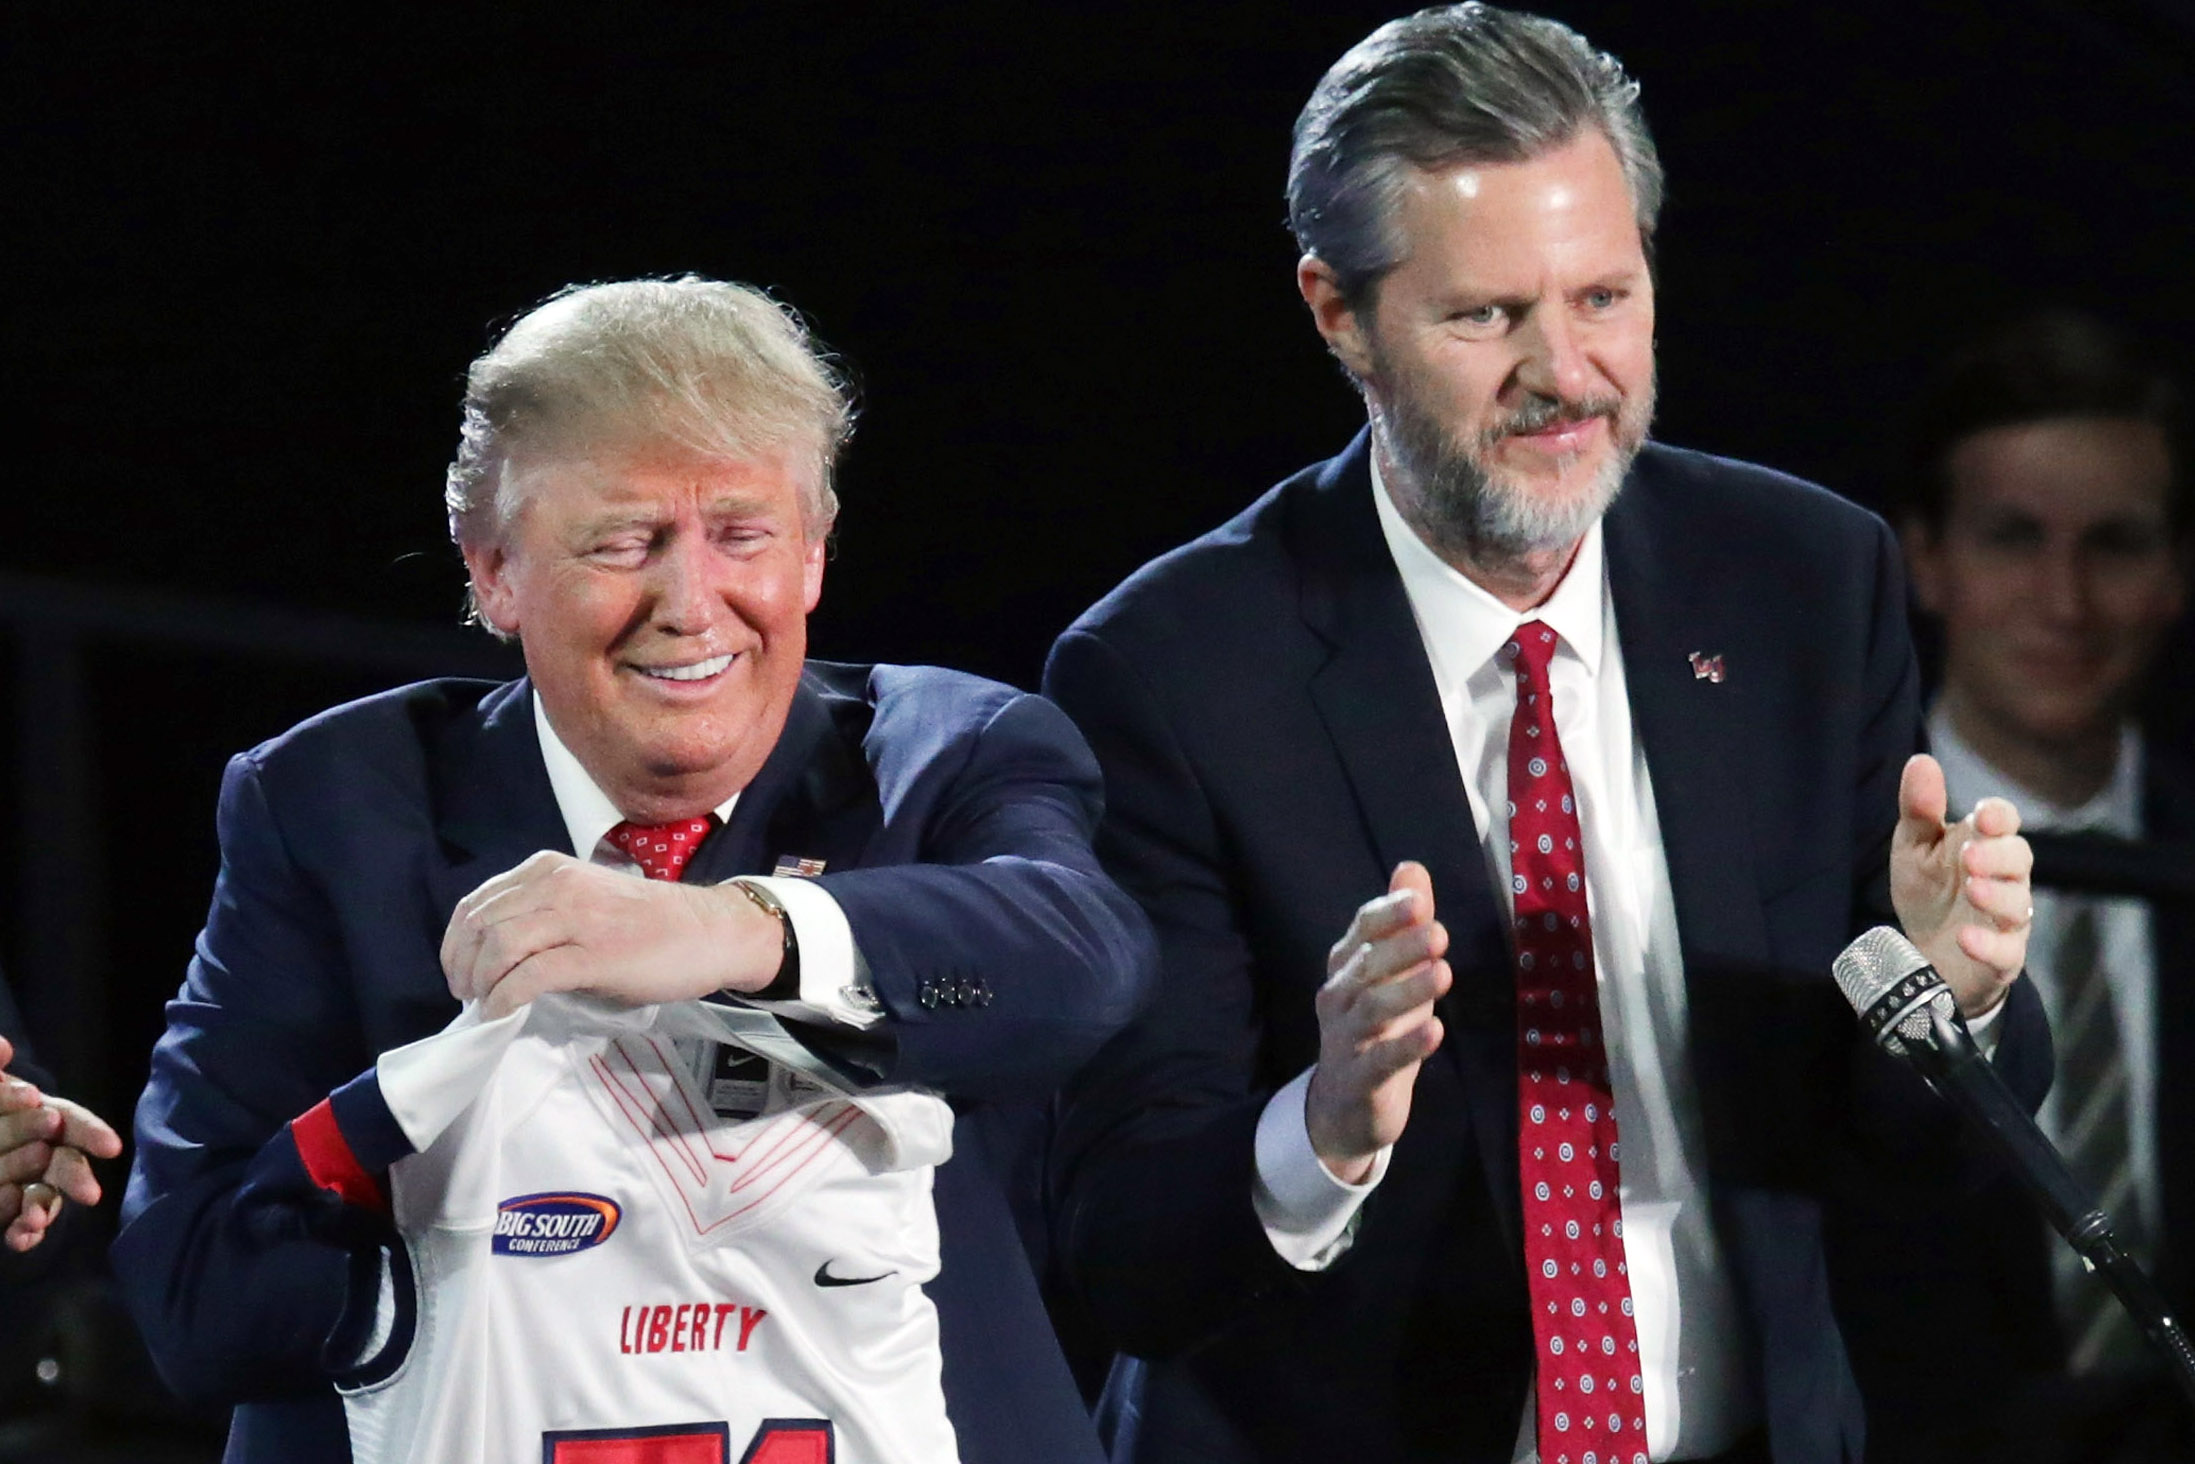 Jerry Falwell, Jr. presents Republican presidential candidate Donald Trump with a sports jersey after he delivered the convocation on Jan. 18, 2016 in Lynchburg, Va. (Chip Somodevilla—Getty Images)